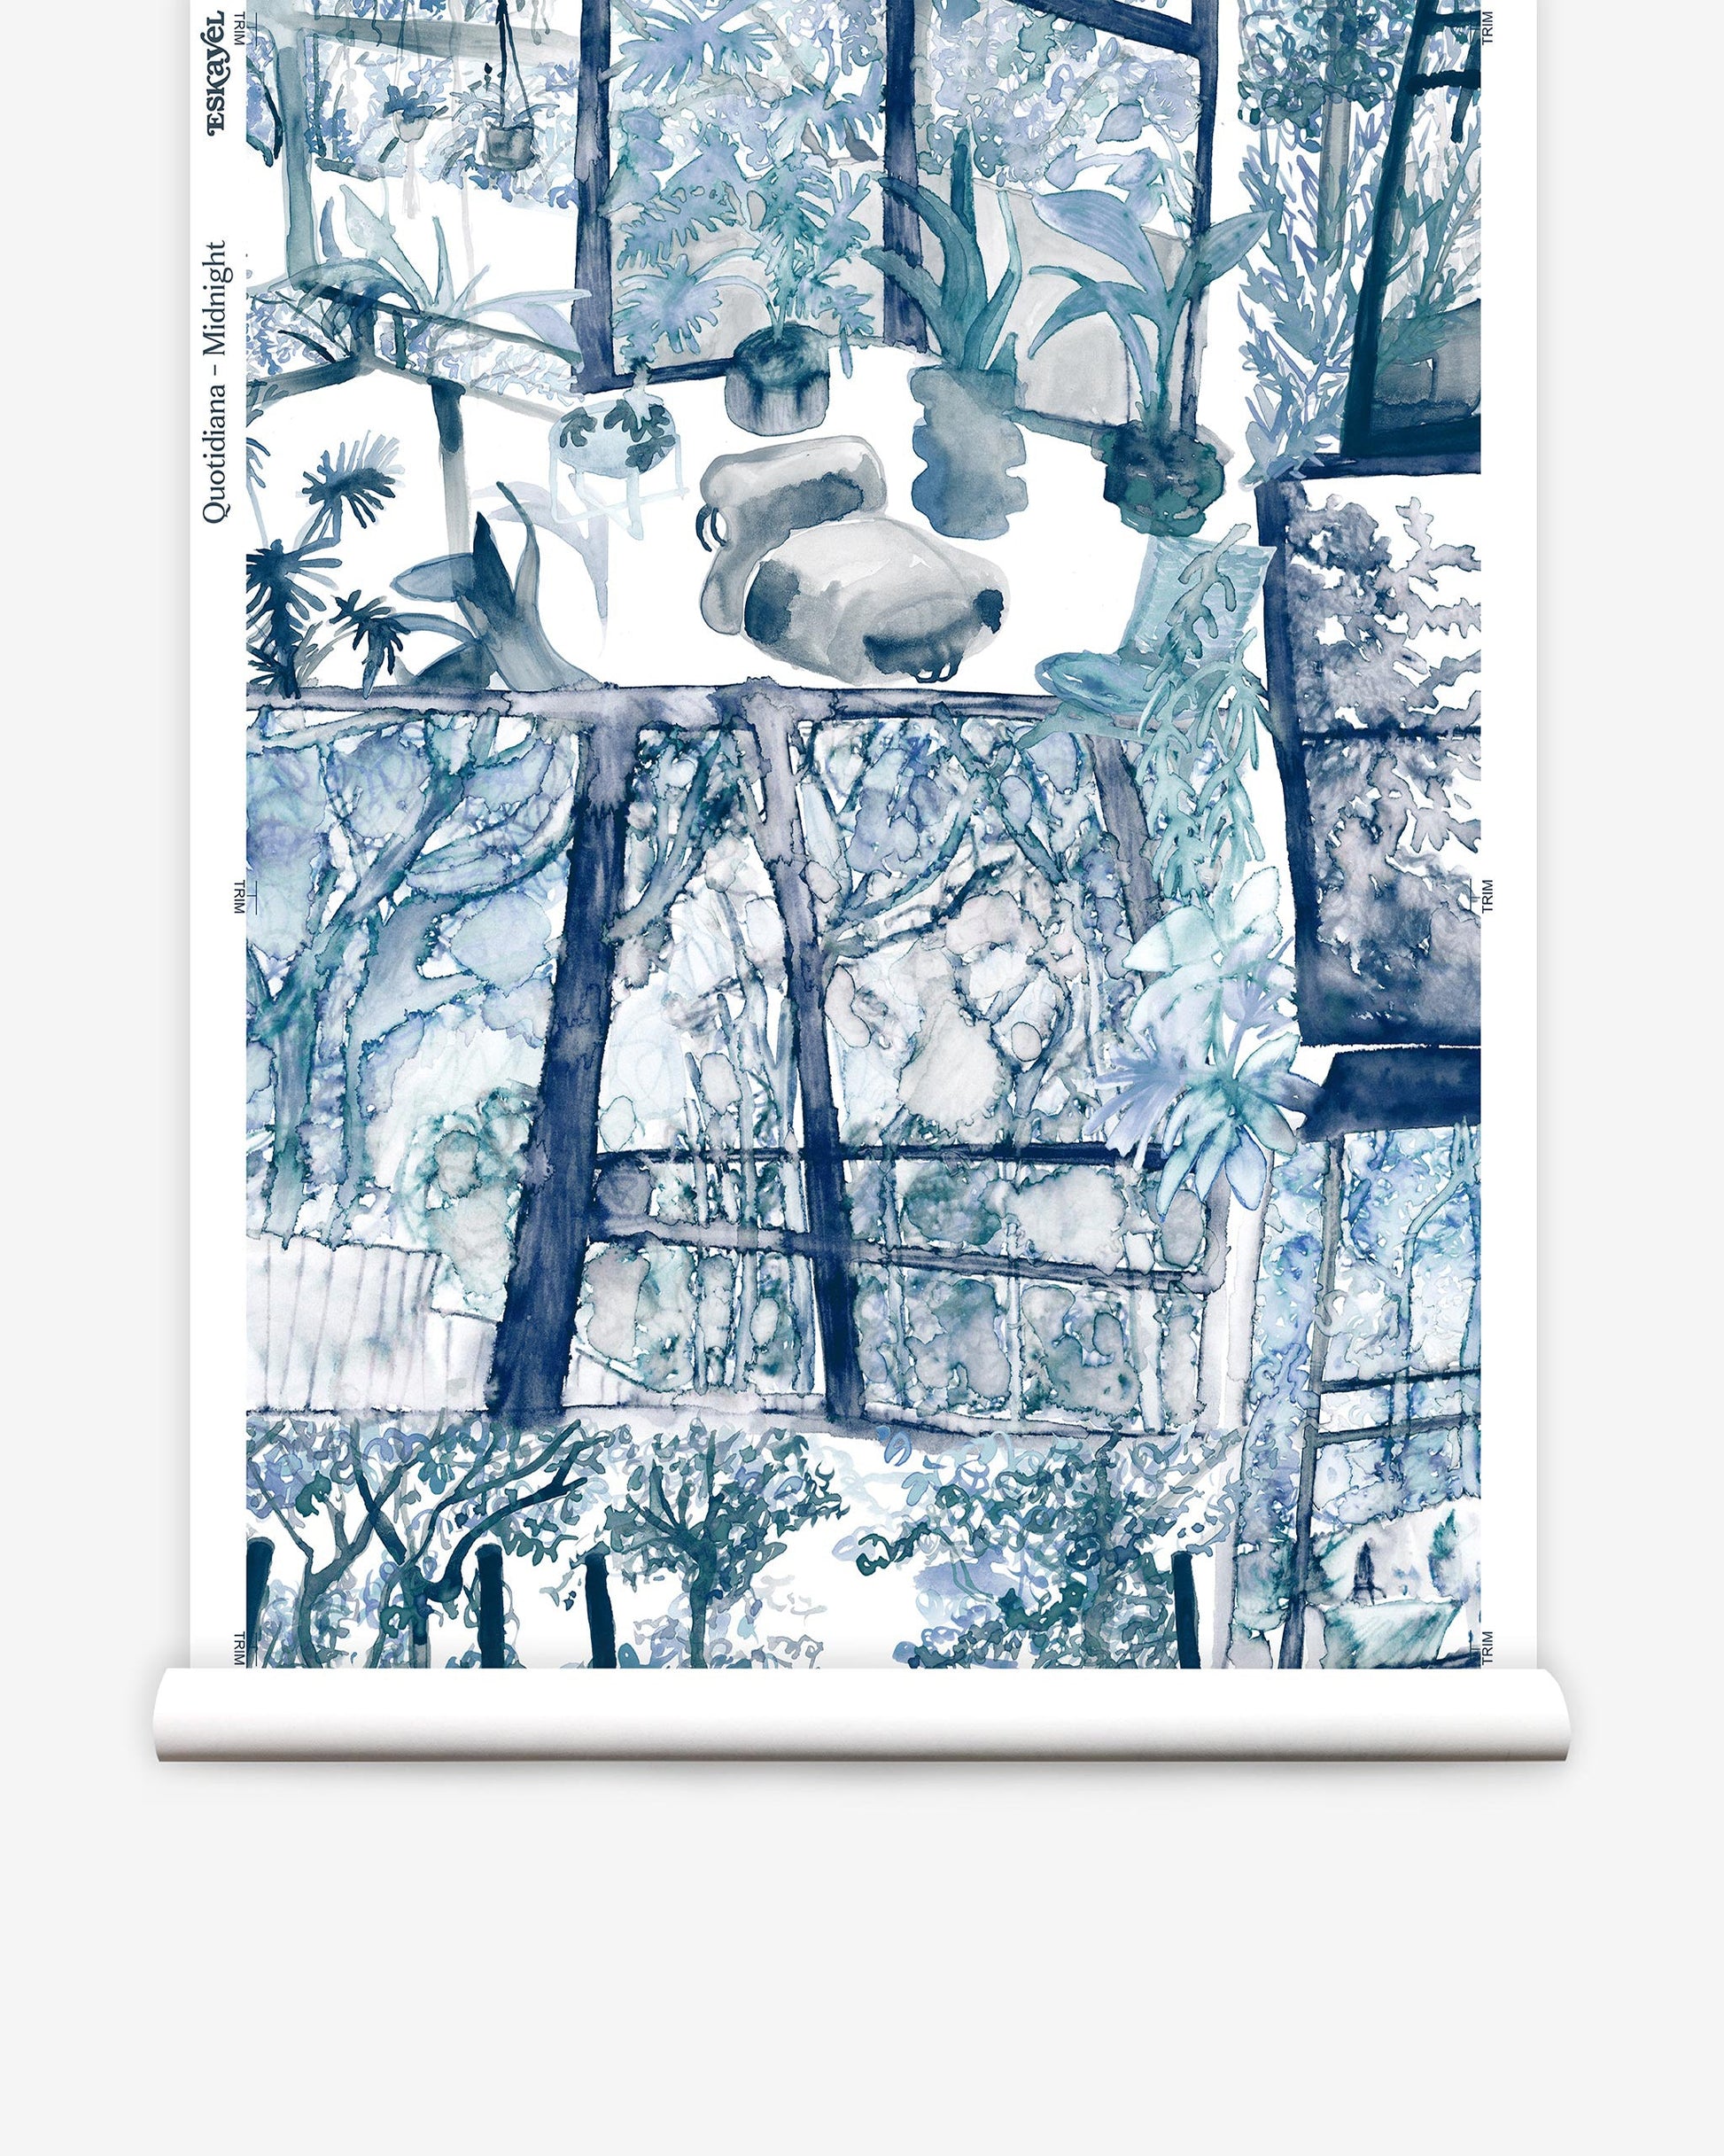 A blue and white wallpaper with images of plants and trees, featuring the Quotidiana Wallpaper Midnight pattern